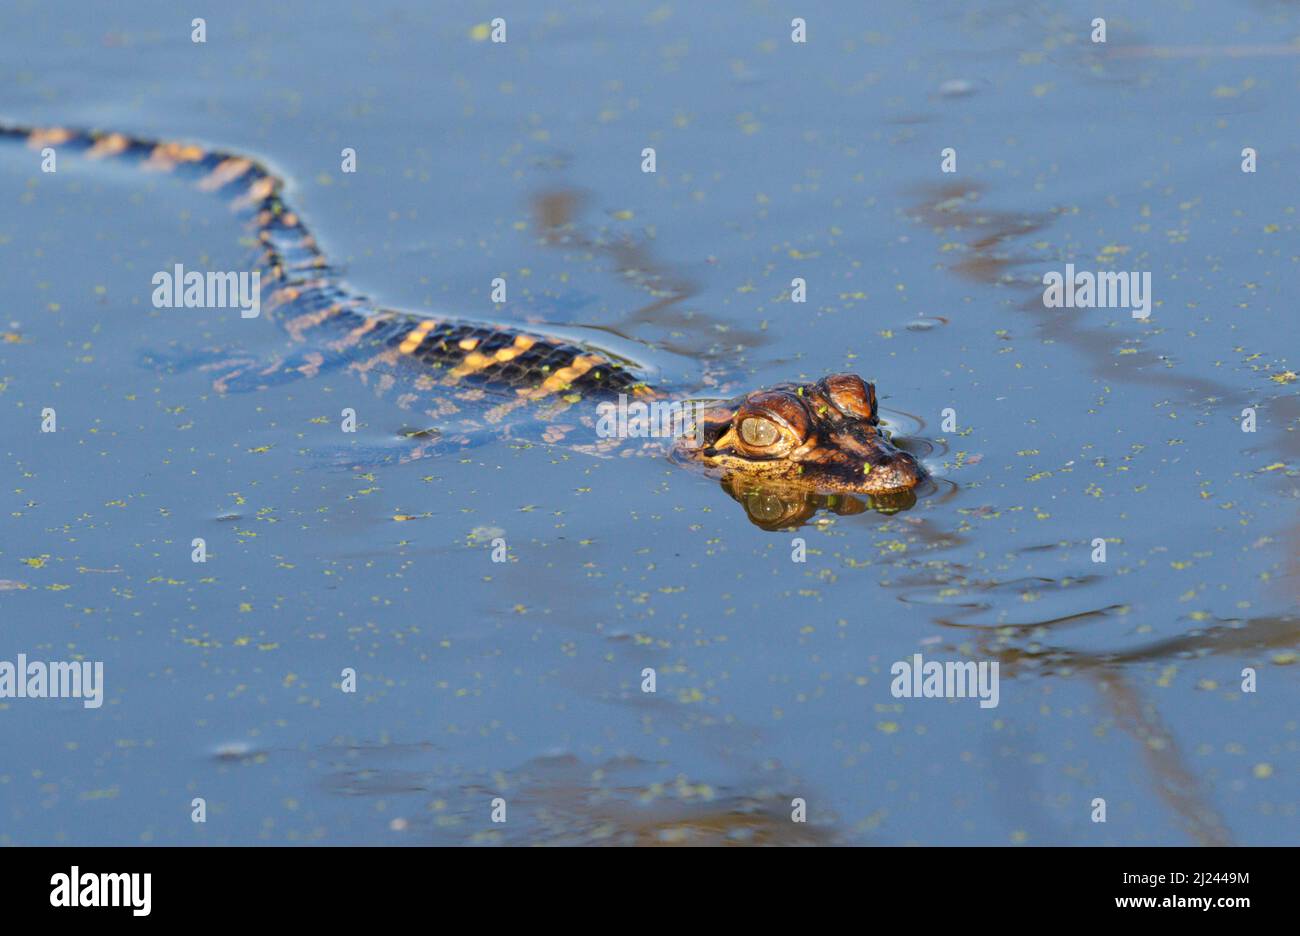 Baby American alligator (Alligator mississippiensis) swimming in a forest lake, Brazos Bend State Park, Needville, Texas, USA. Stock Photo